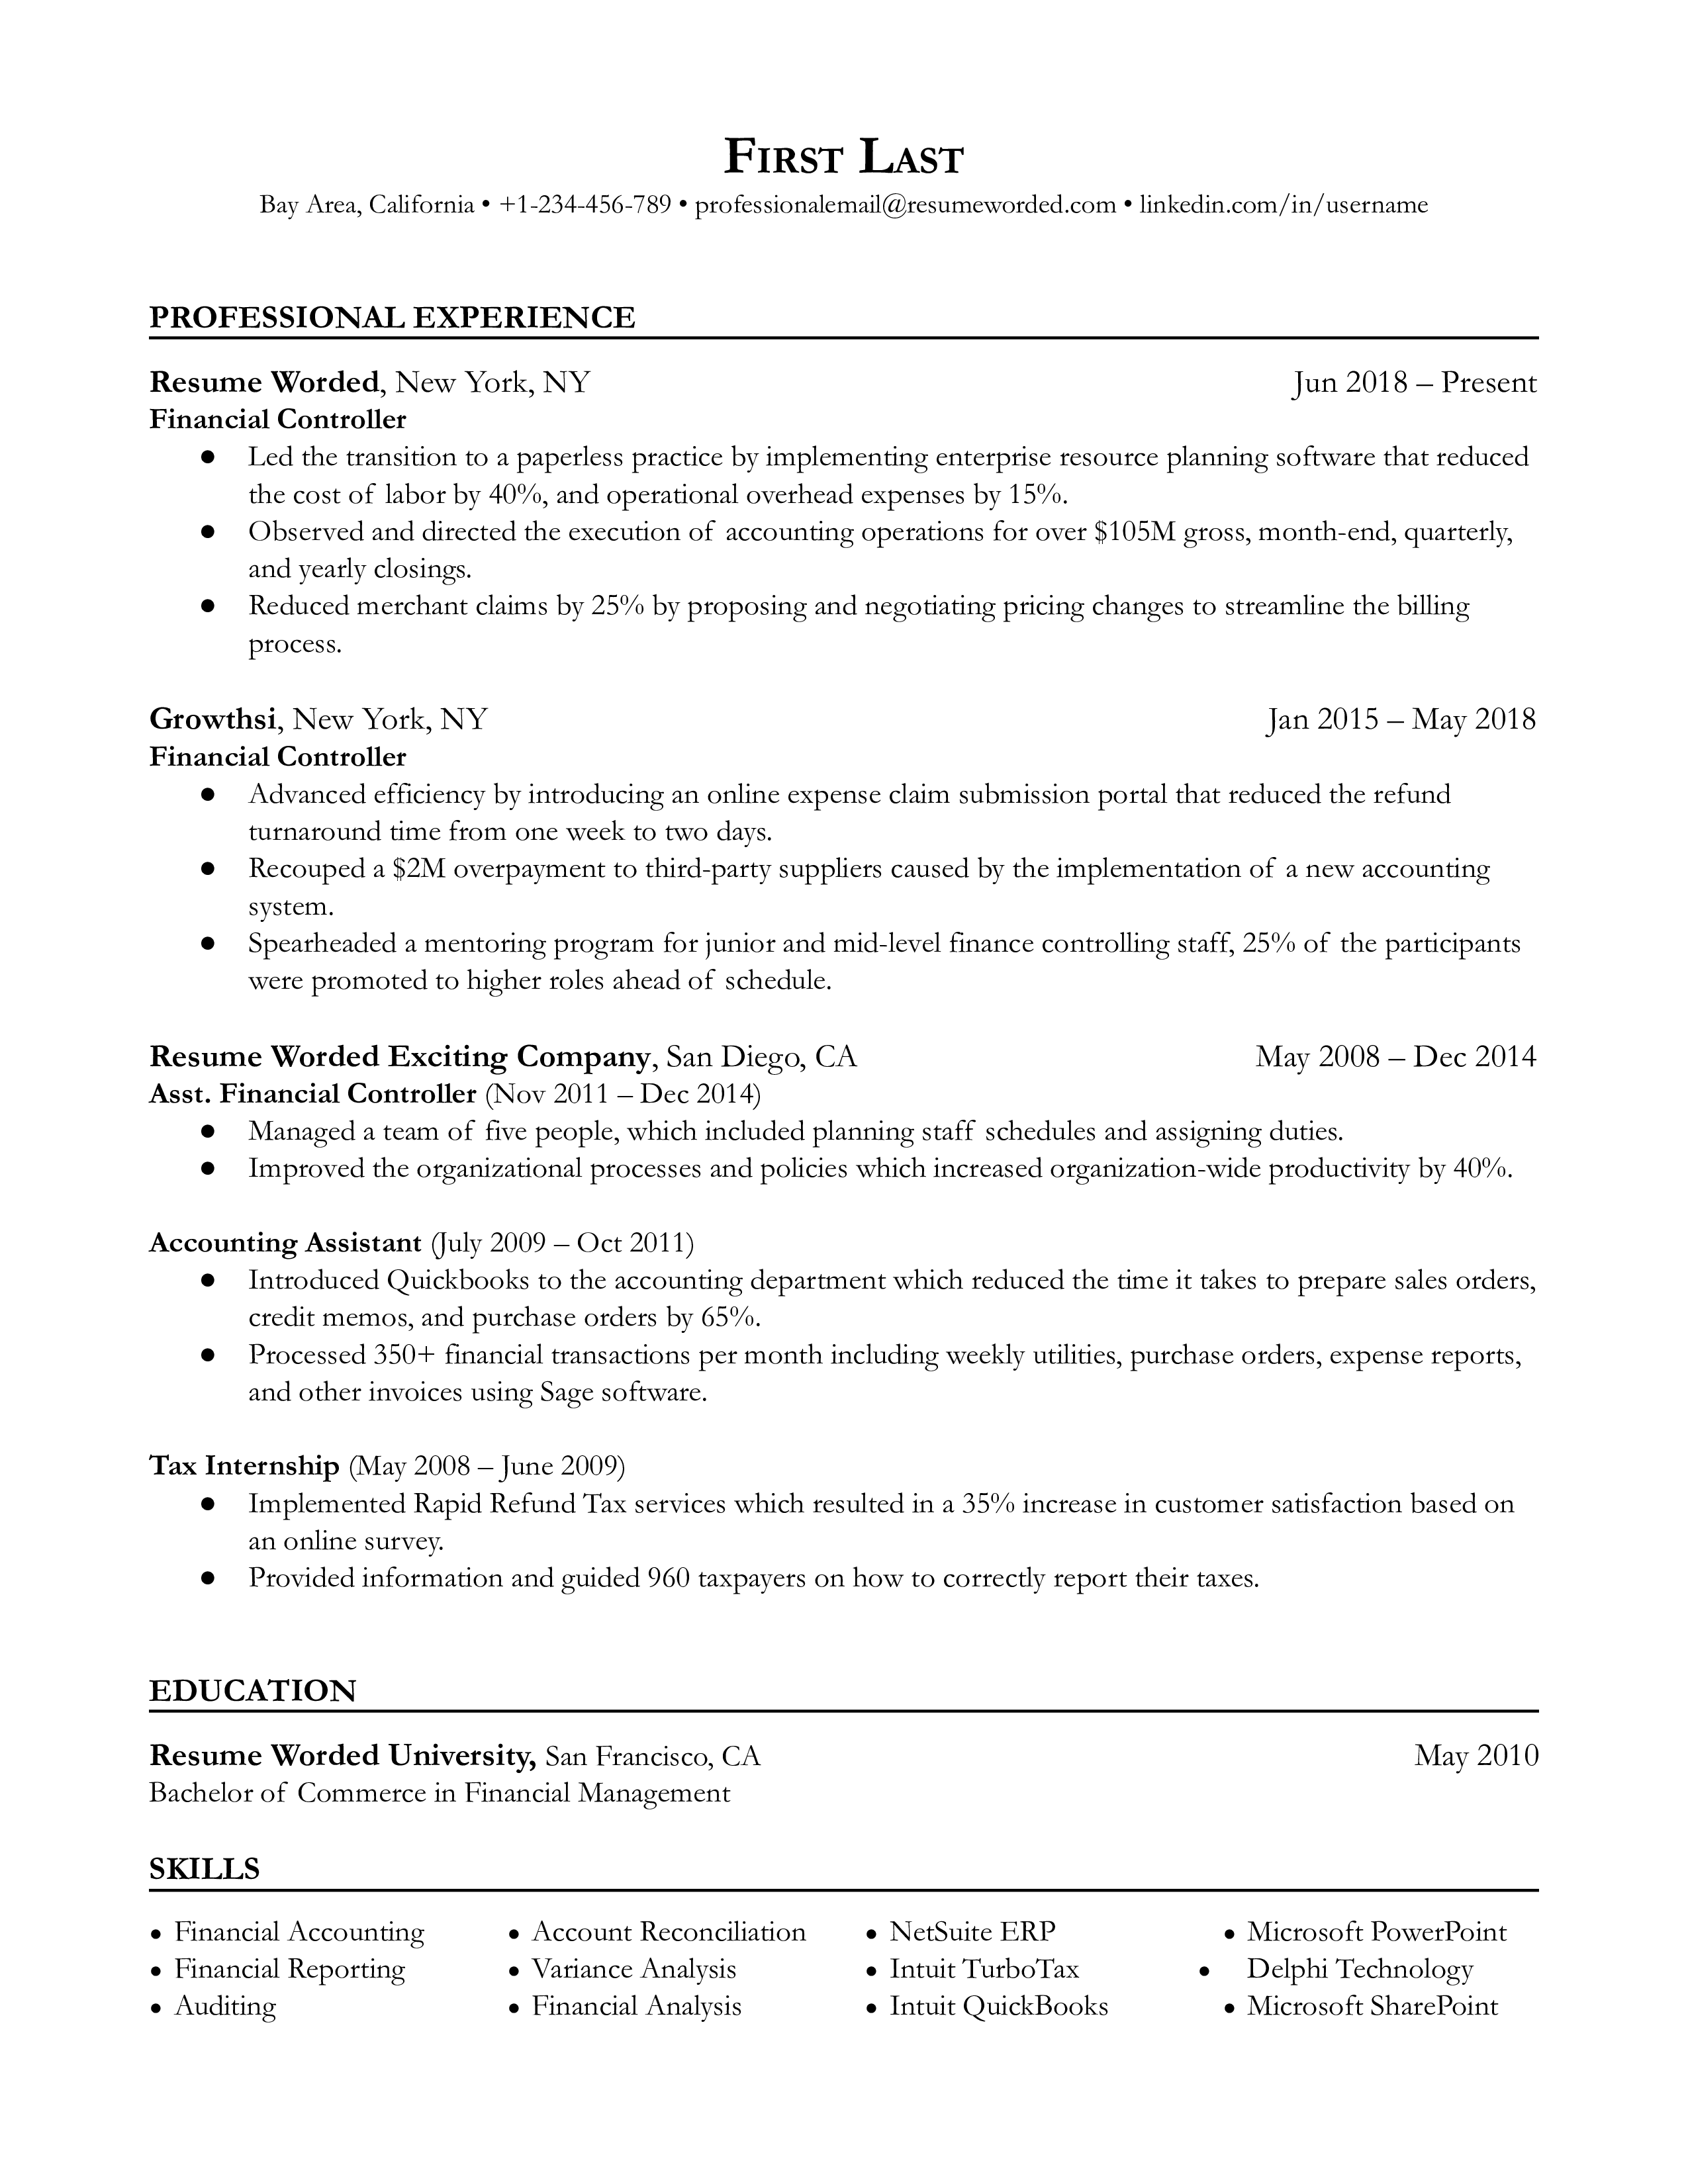 A CV sample for Financial Controller role emphasizing analytical skills and tech proficiency.